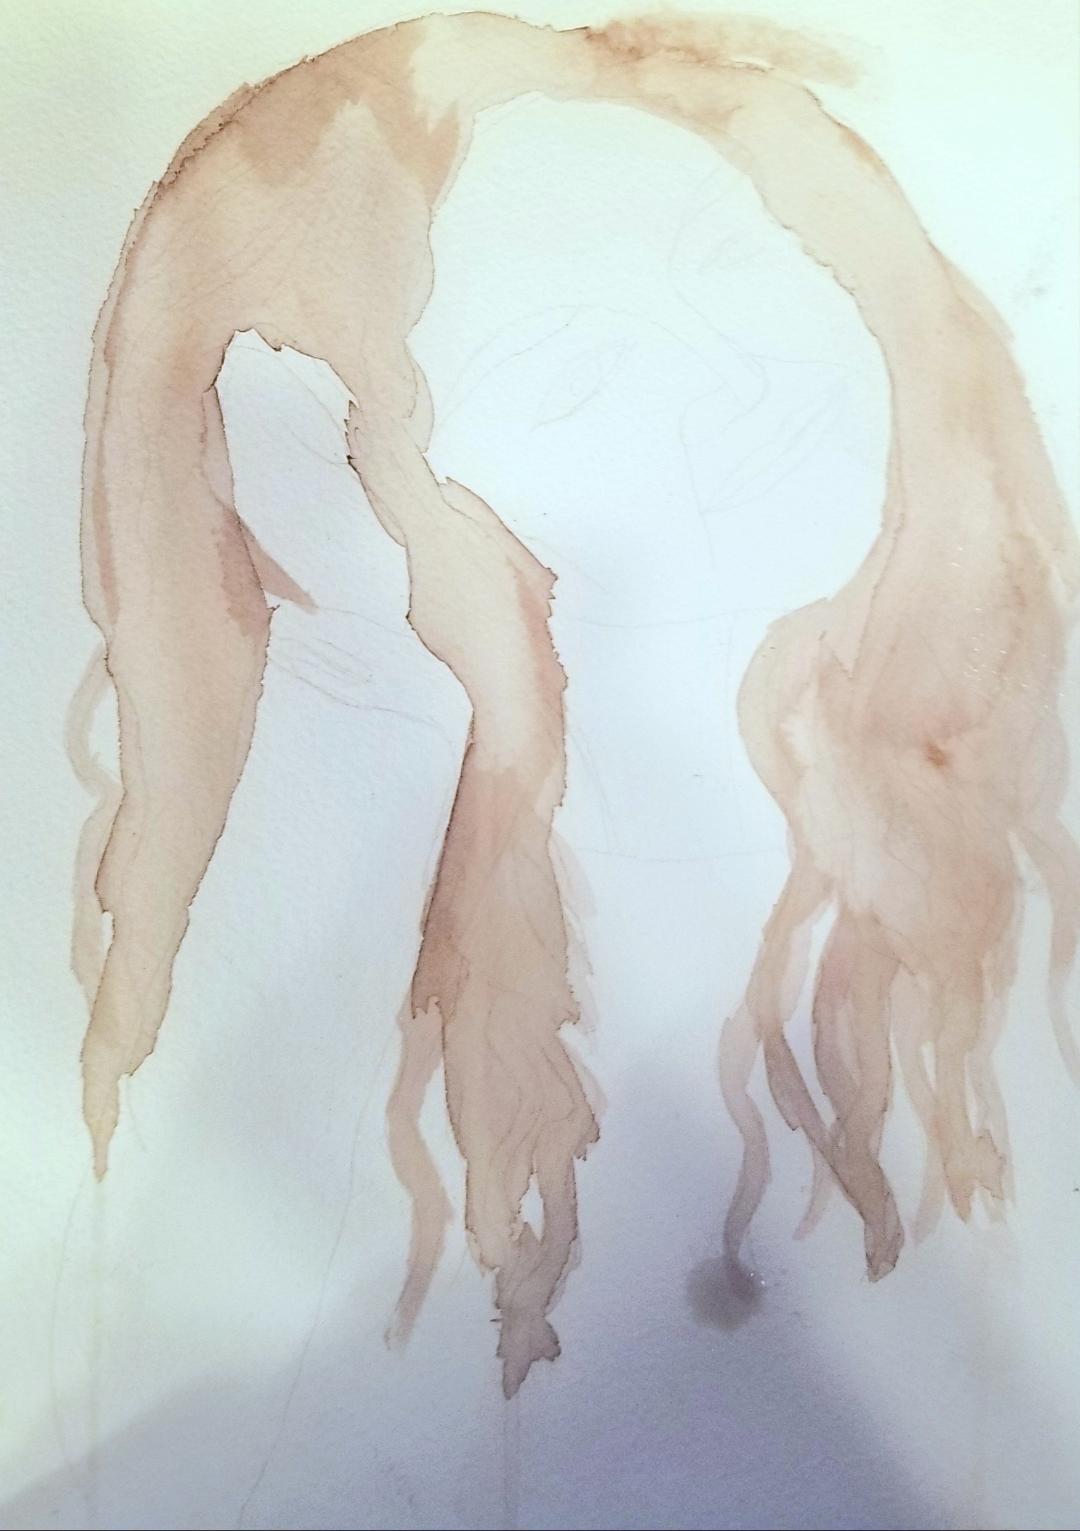 Painting Curly Hair In Watercolor - BRING OUT YOUR CREATIVITY